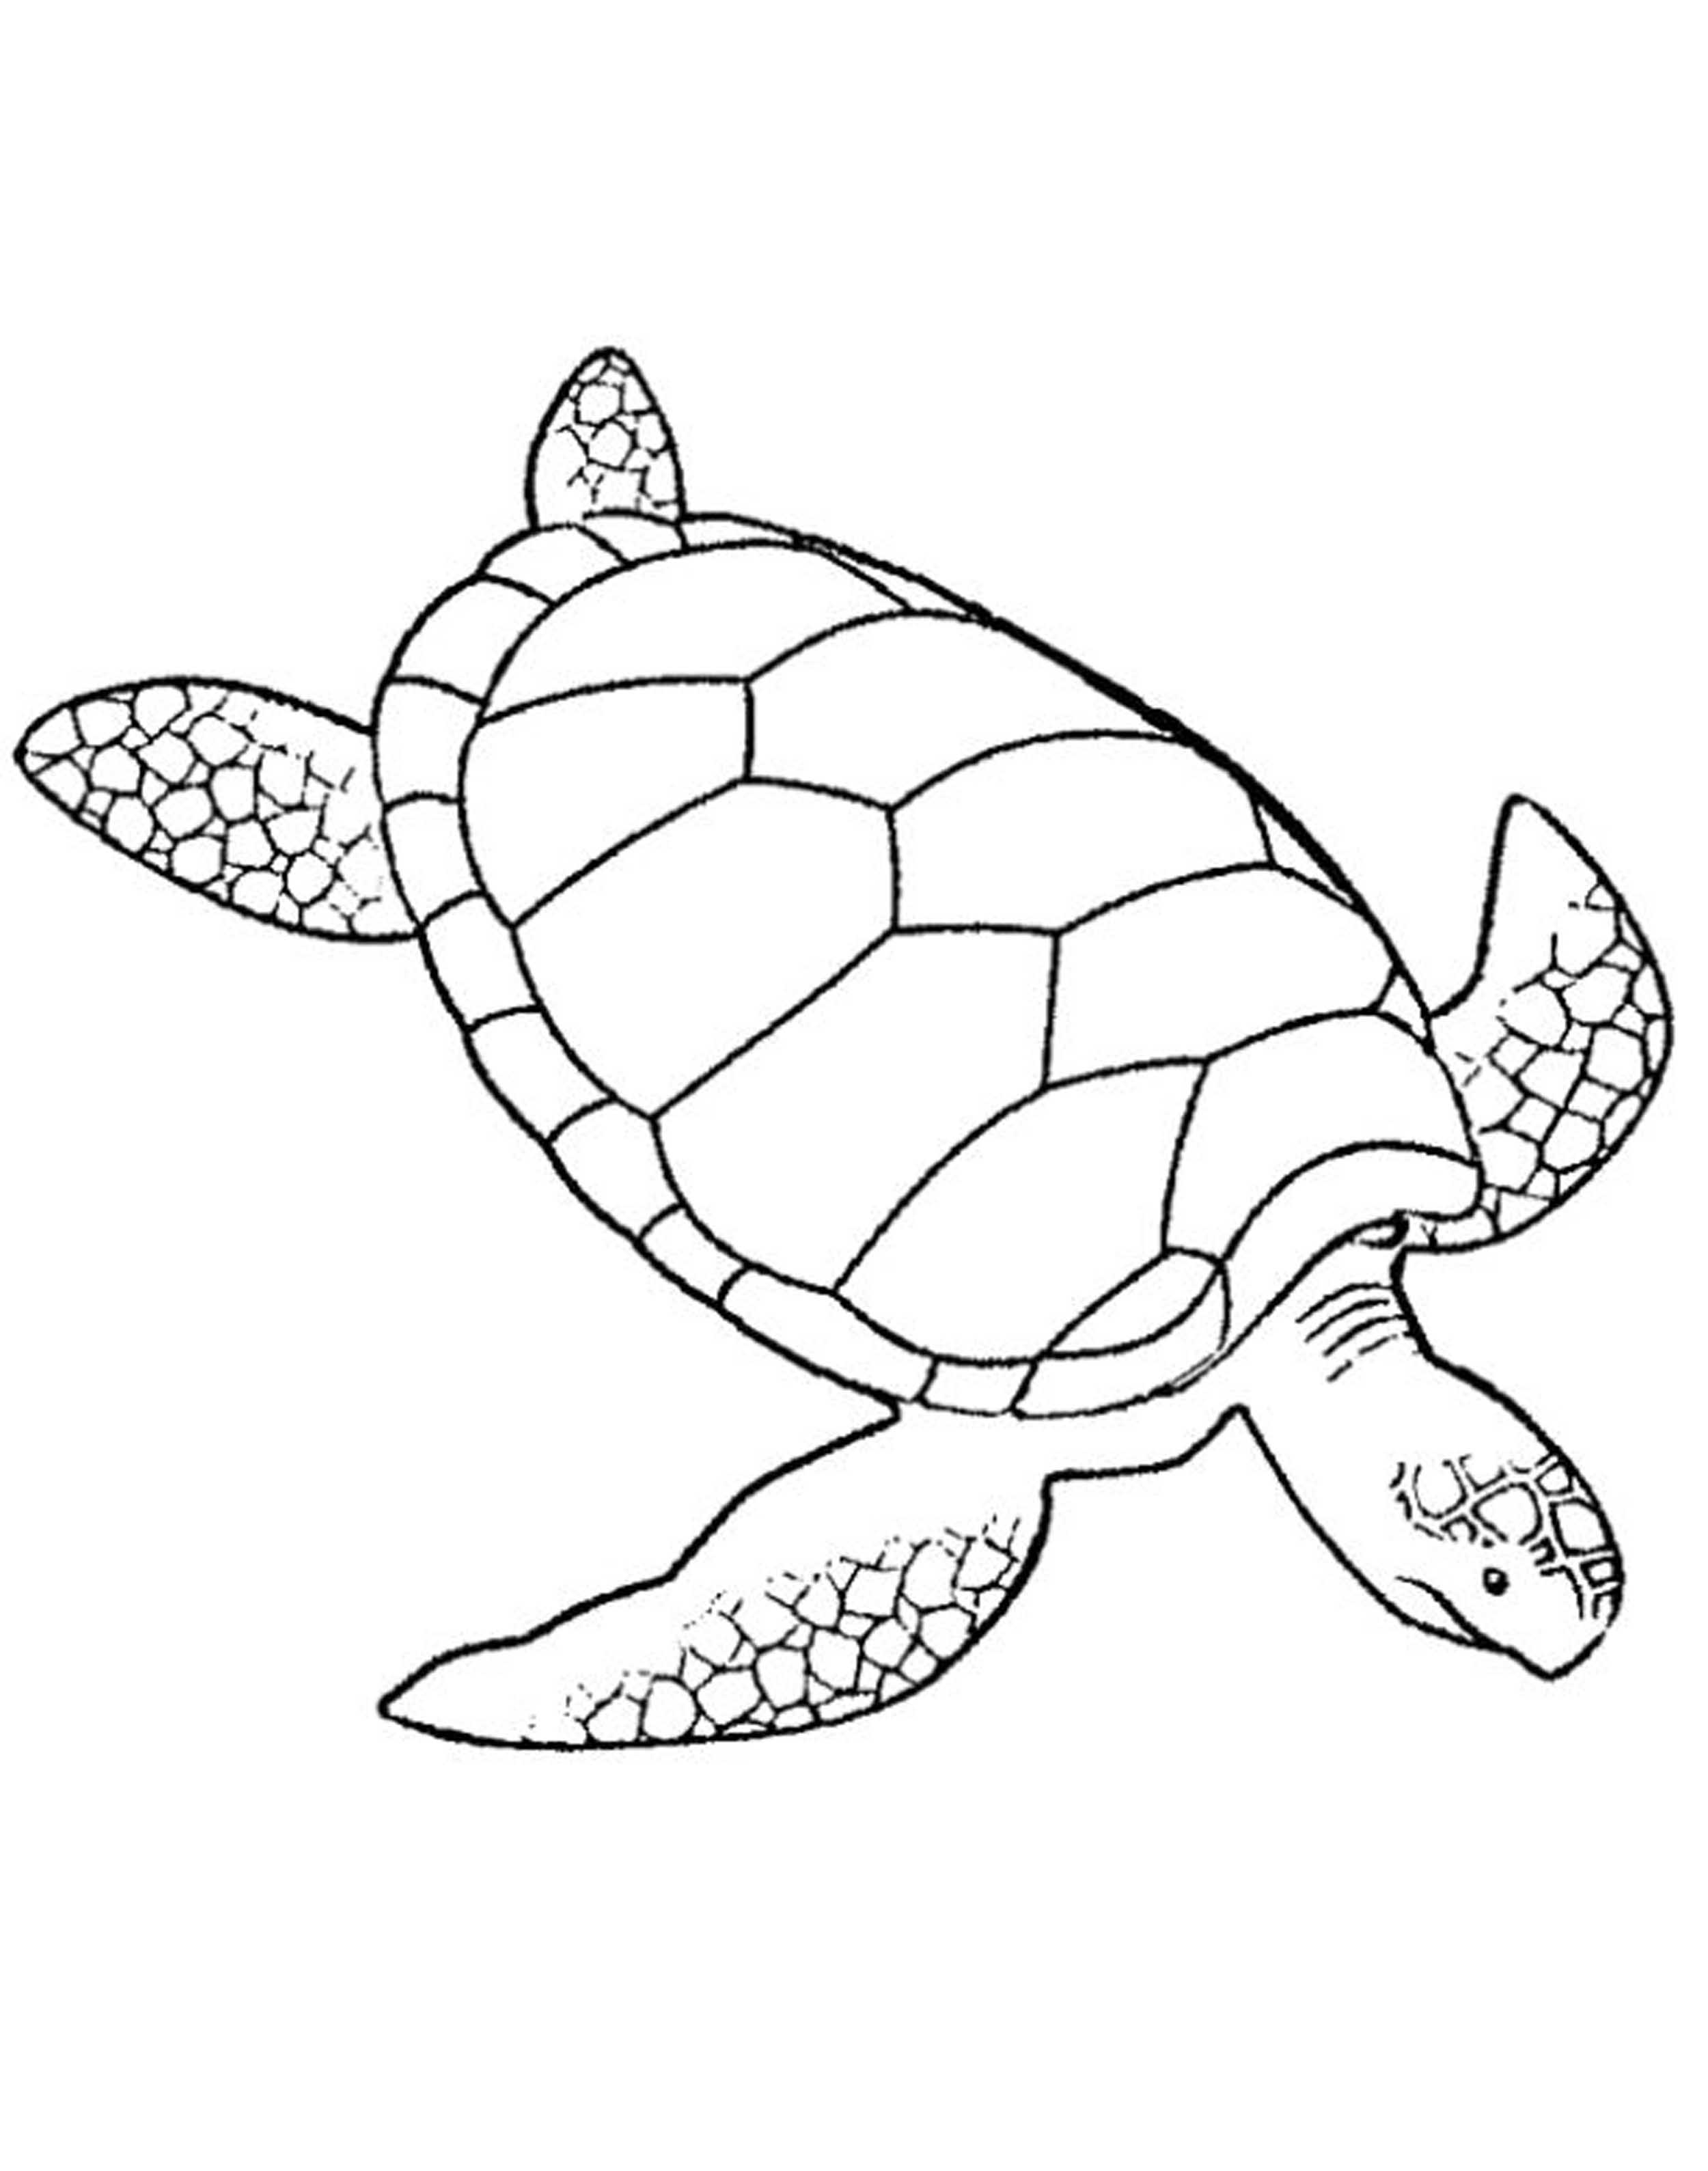 Download Print & Download - Turtle Coloring Pages as the ...